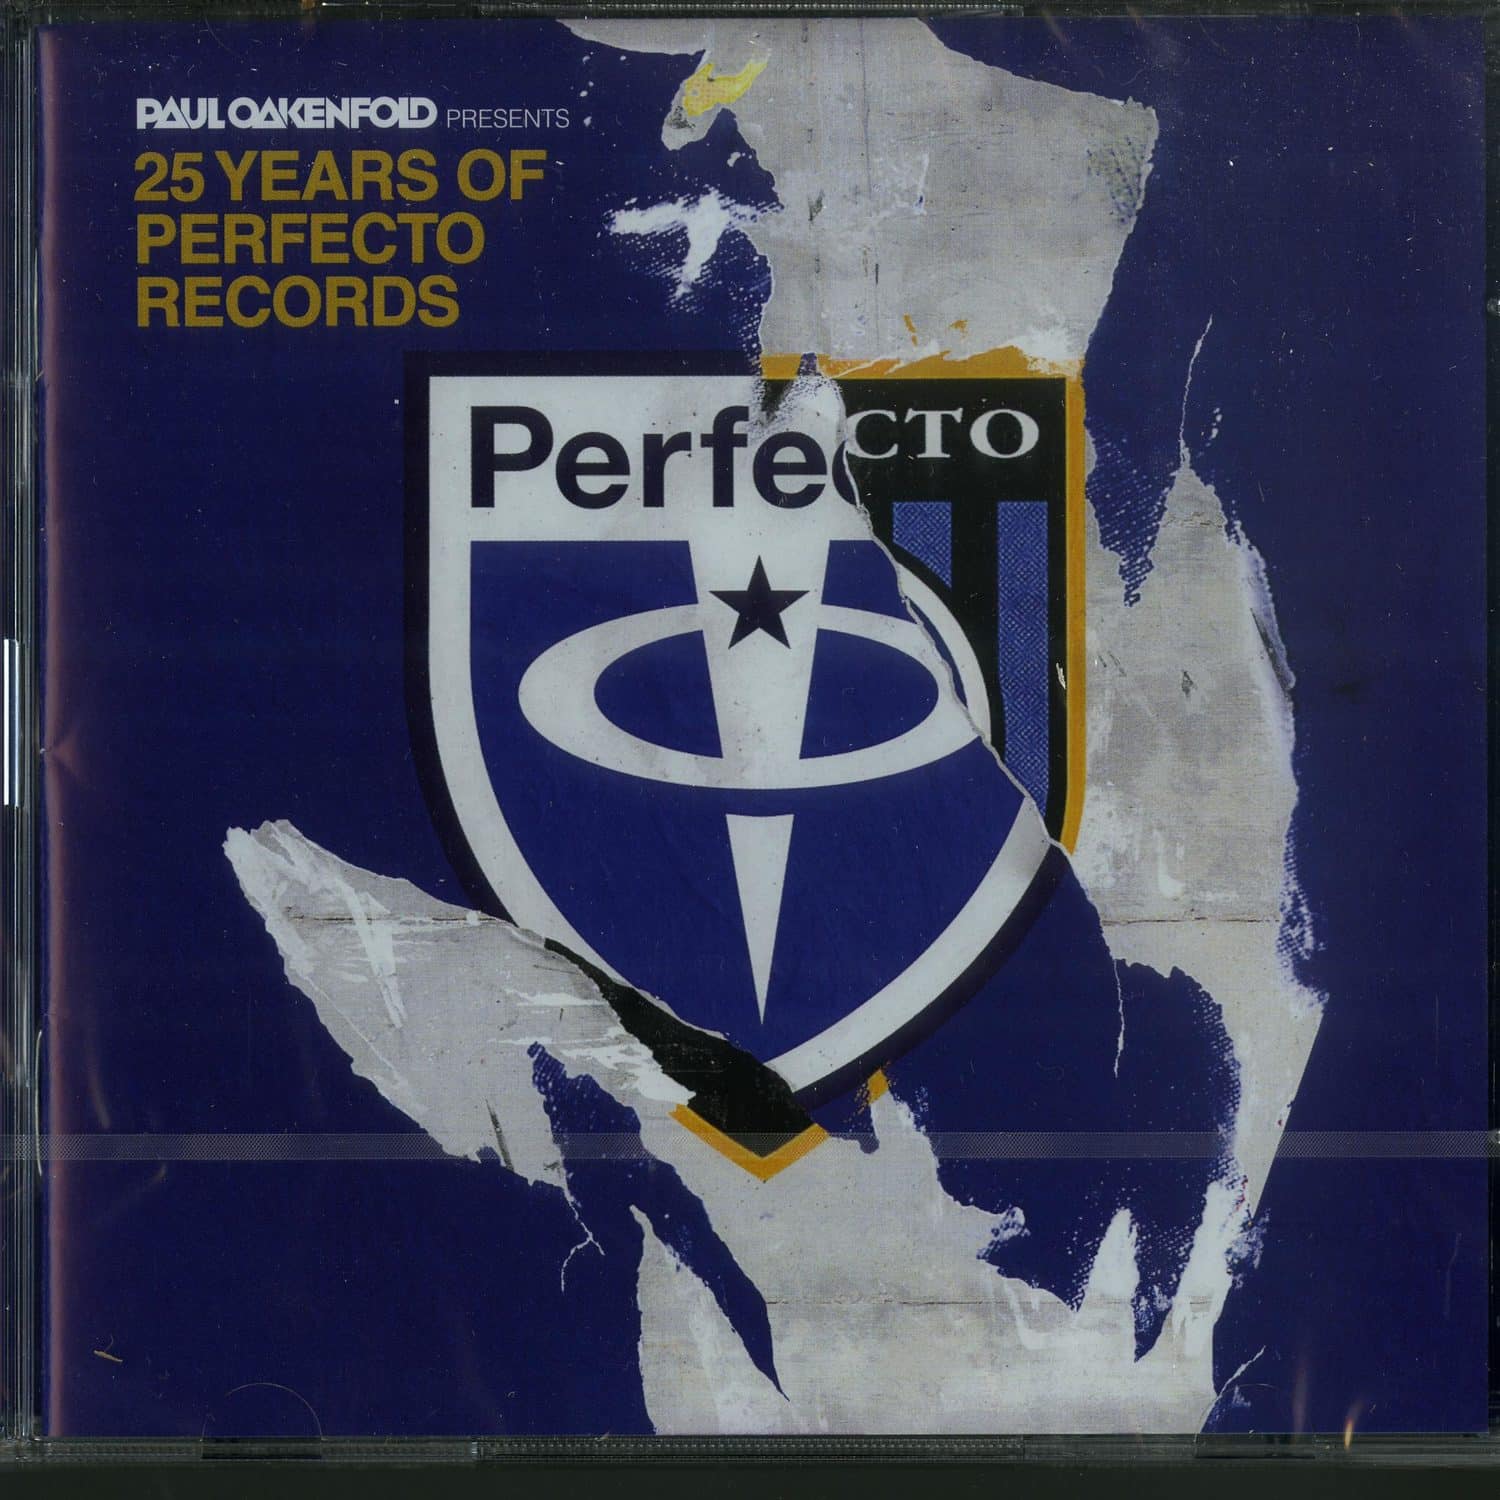 Paul Oakenfold - 25 YEARS OF PERFECTO RECORDS 